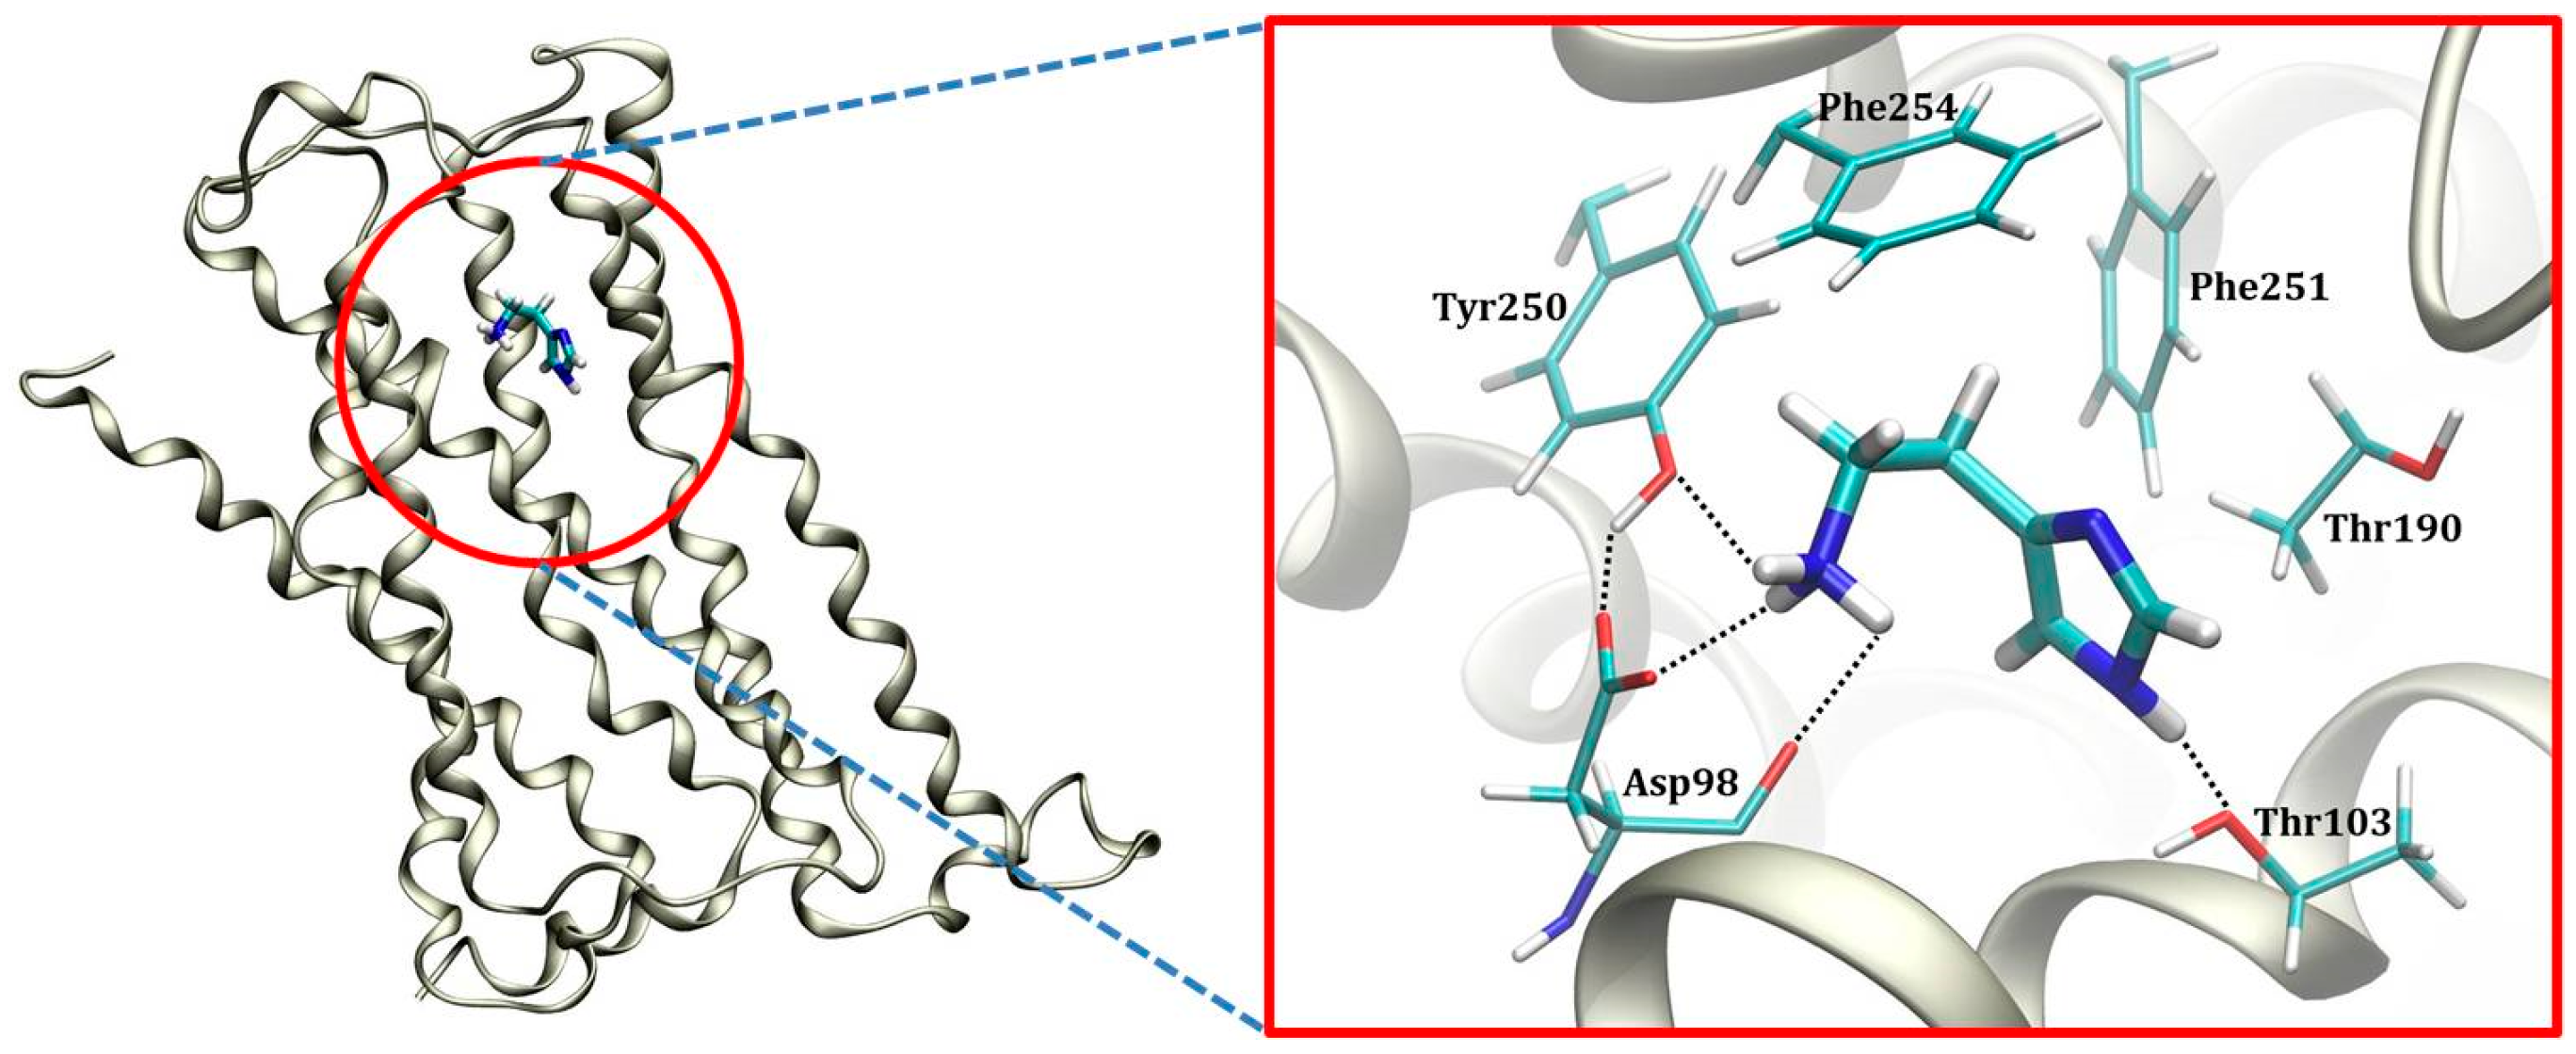 Molecules | Free Full-Text | The Effect of Deuteration on the H2 Receptor  Histamine Binding Profile: A Computational Insight into Modified Hydrogen  Bonding Interactions